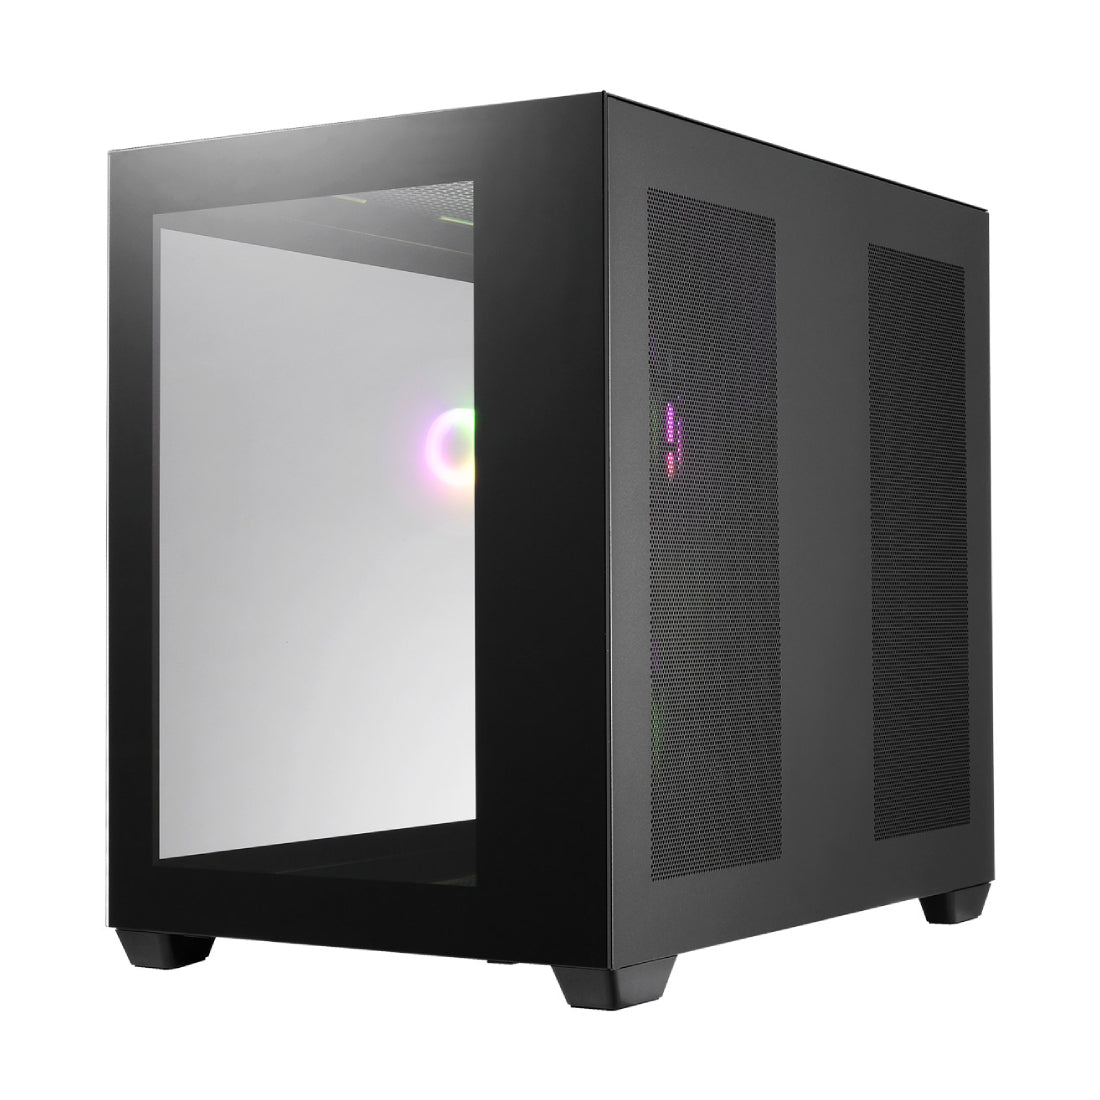 FSP CMT380A ATX Mid Tower Case - Black - صندوق - Store 974 | ستور ٩٧٤